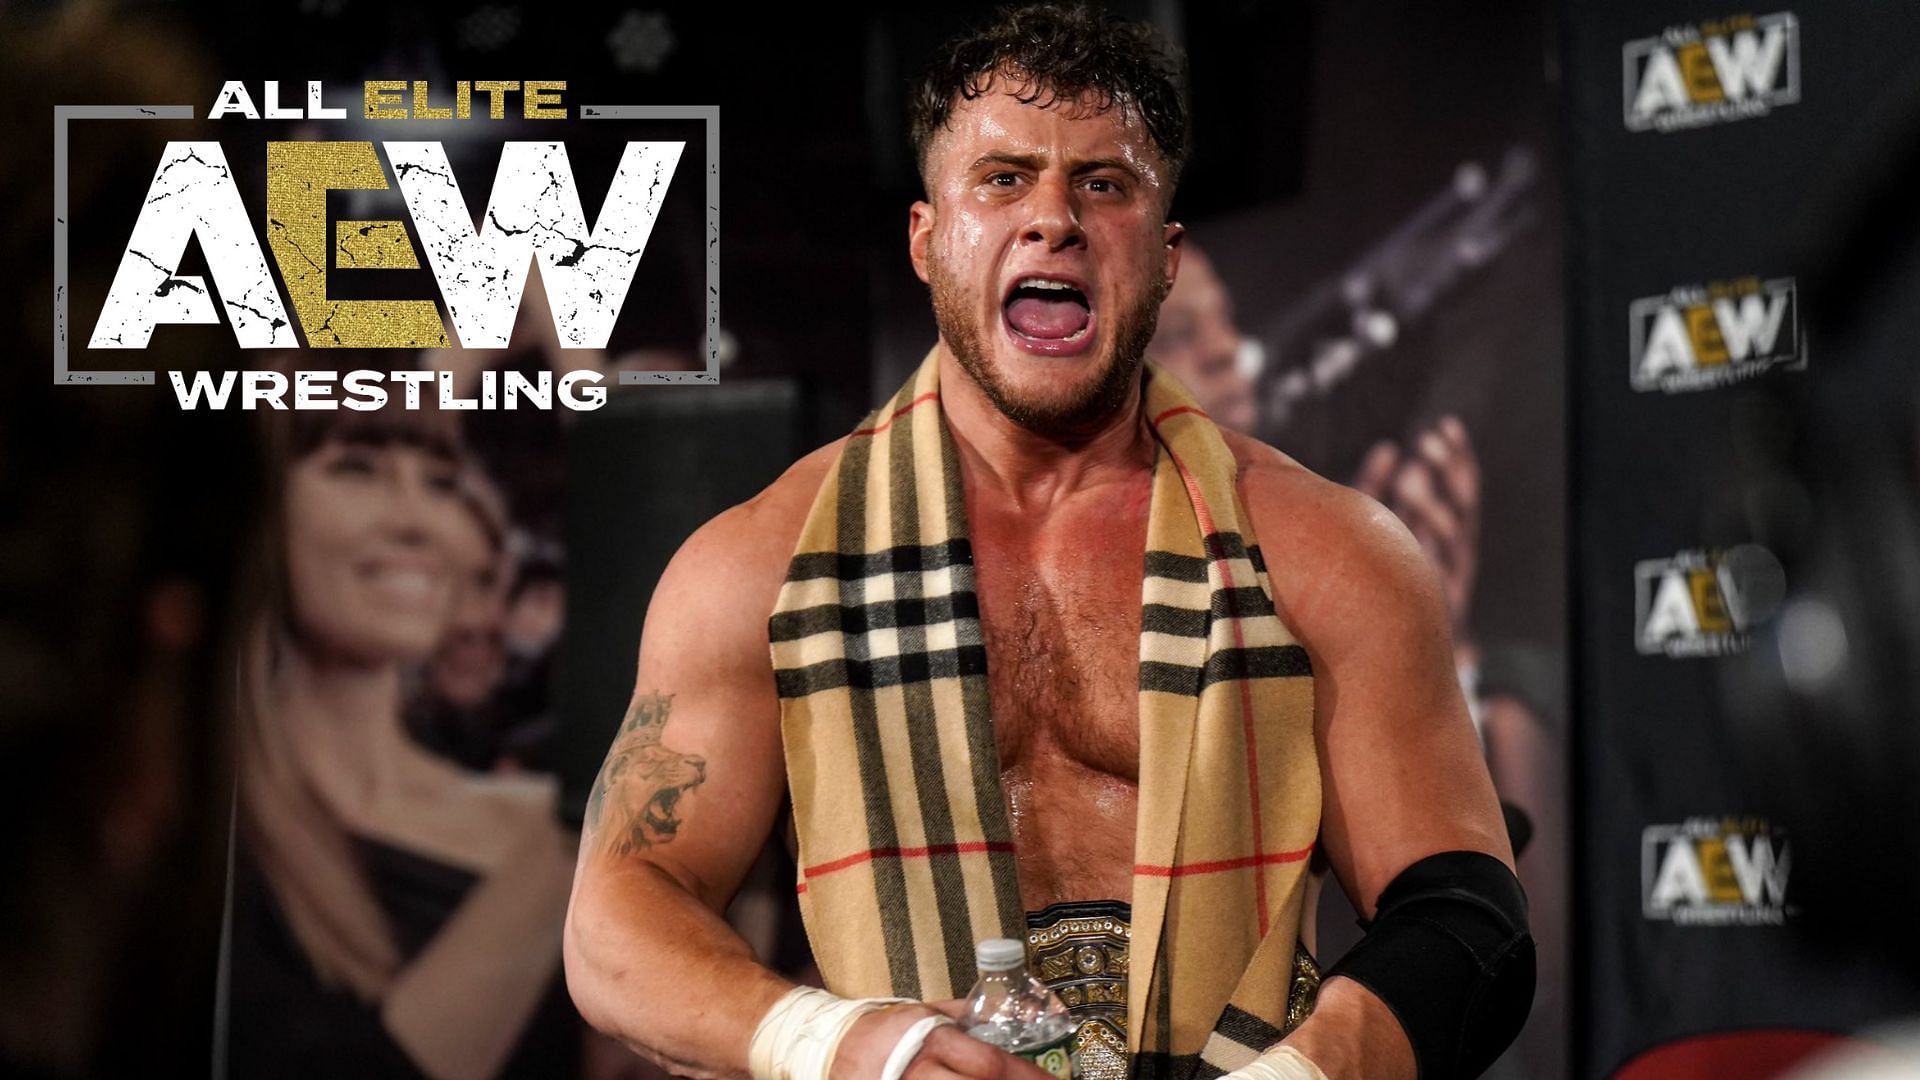 MJF made a startling announcement this week